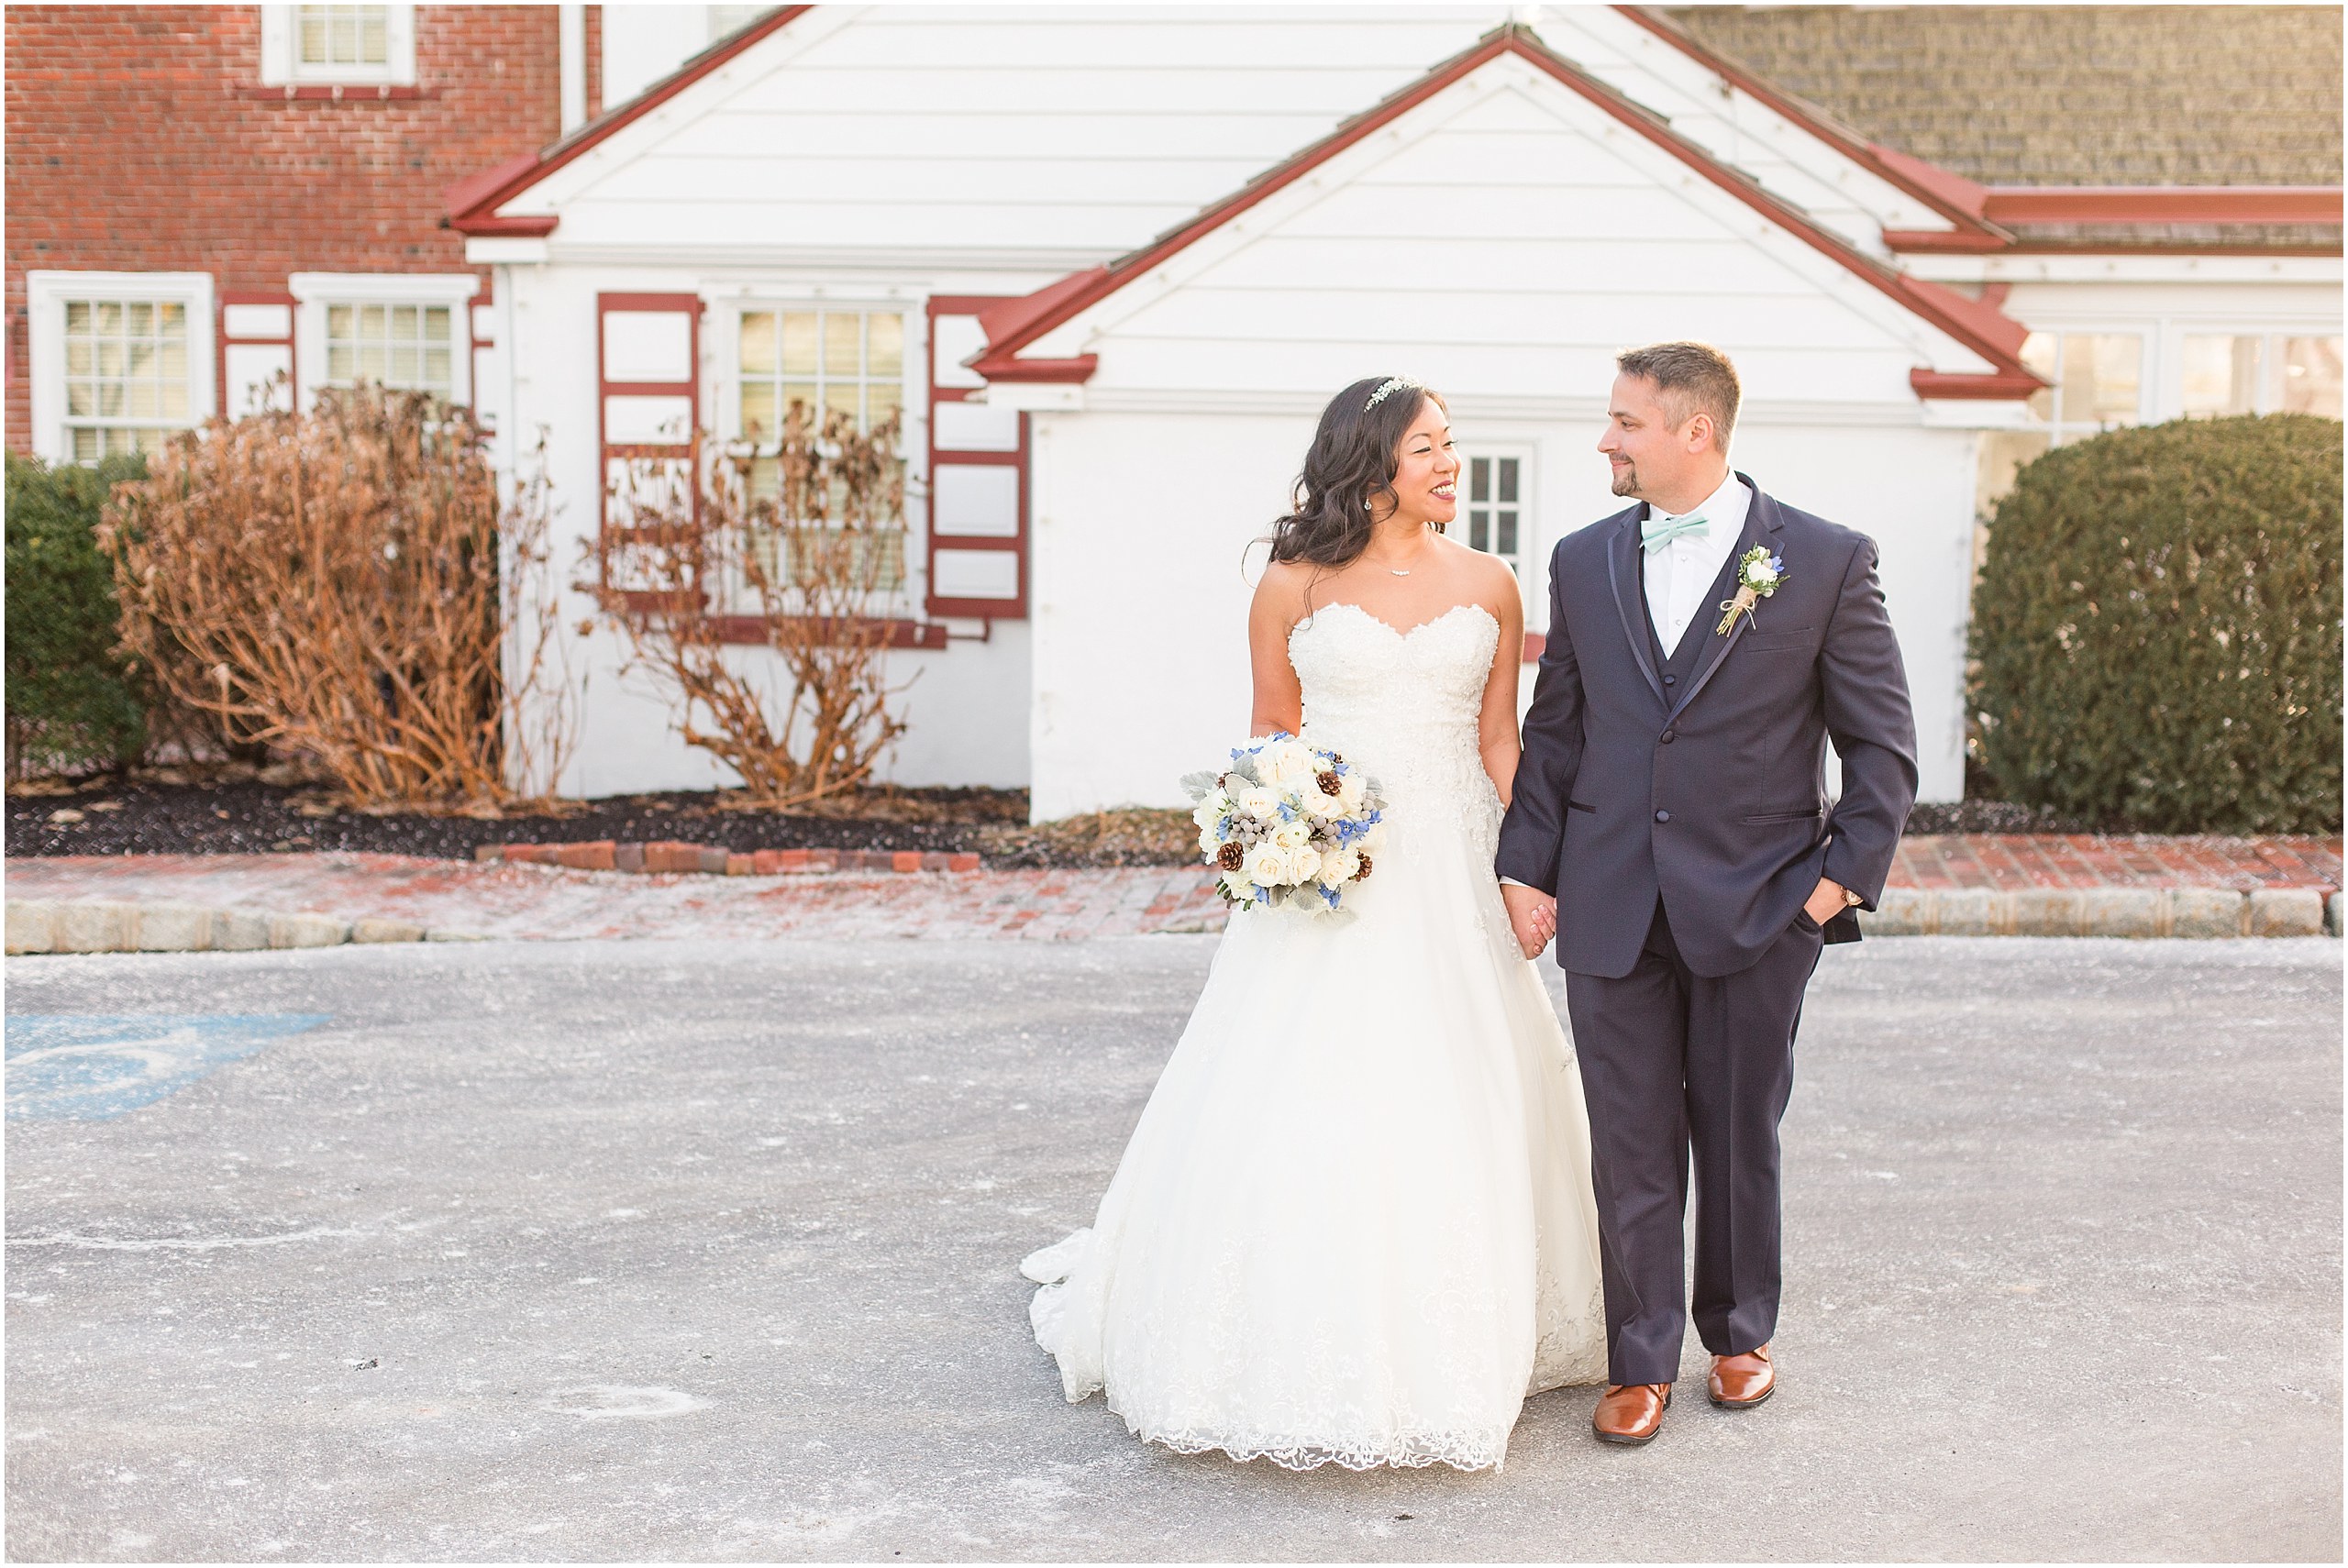 Dave & Jane's Grey & Mint Winter Wedding at Normandy Farm Hotel & Conference Center in Blue Bell, PA Photos